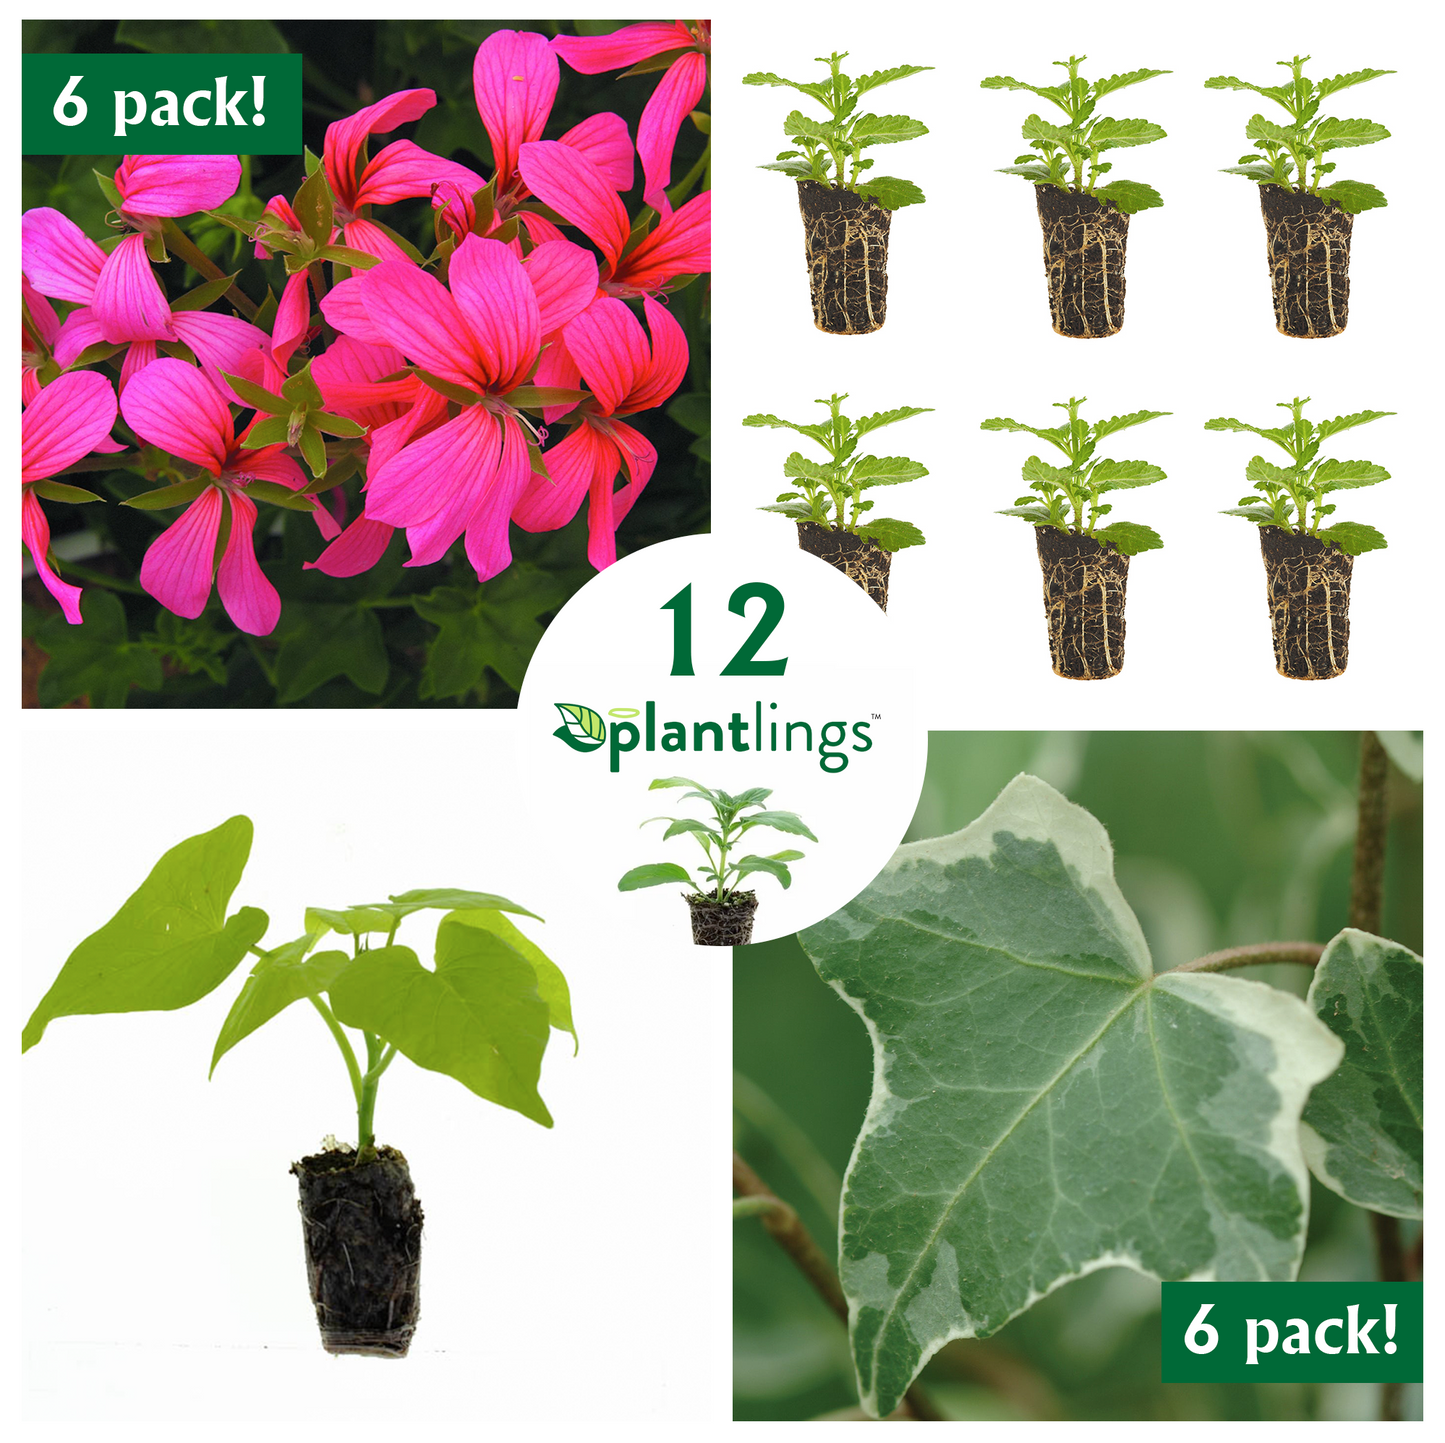 Annual Flower Kit with Geranium Ivy Mini Cascade Pink & Glacier English Ivy Plantlings Live Baby Plants 1-3in., 12-Pack